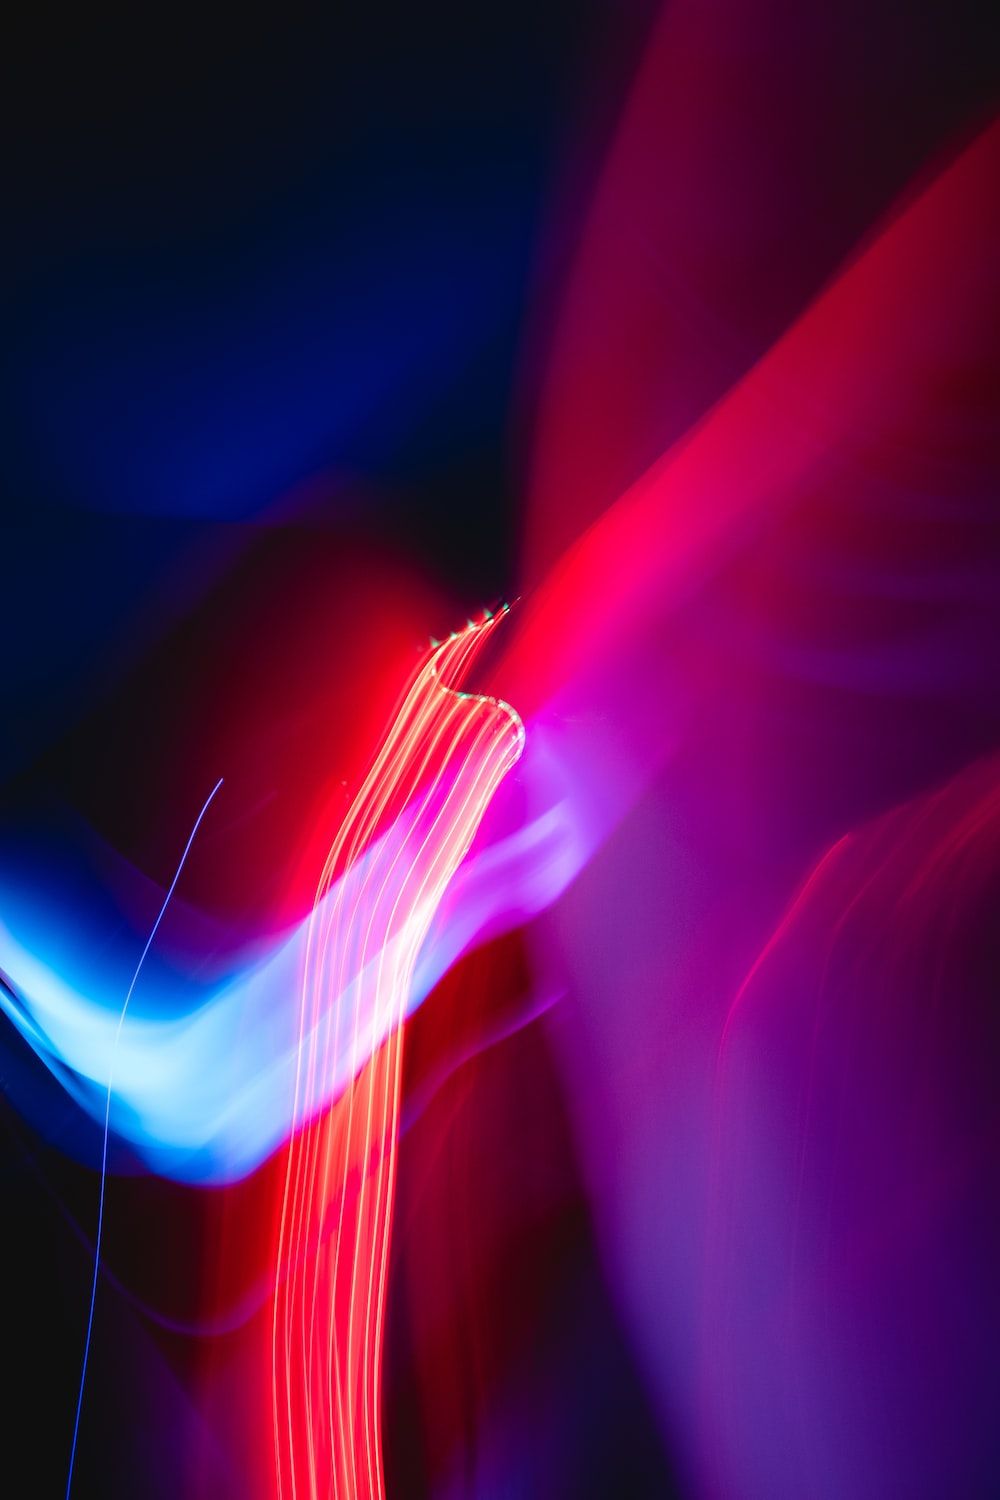 A blurry image of light in motion - Neon red, neon, light red